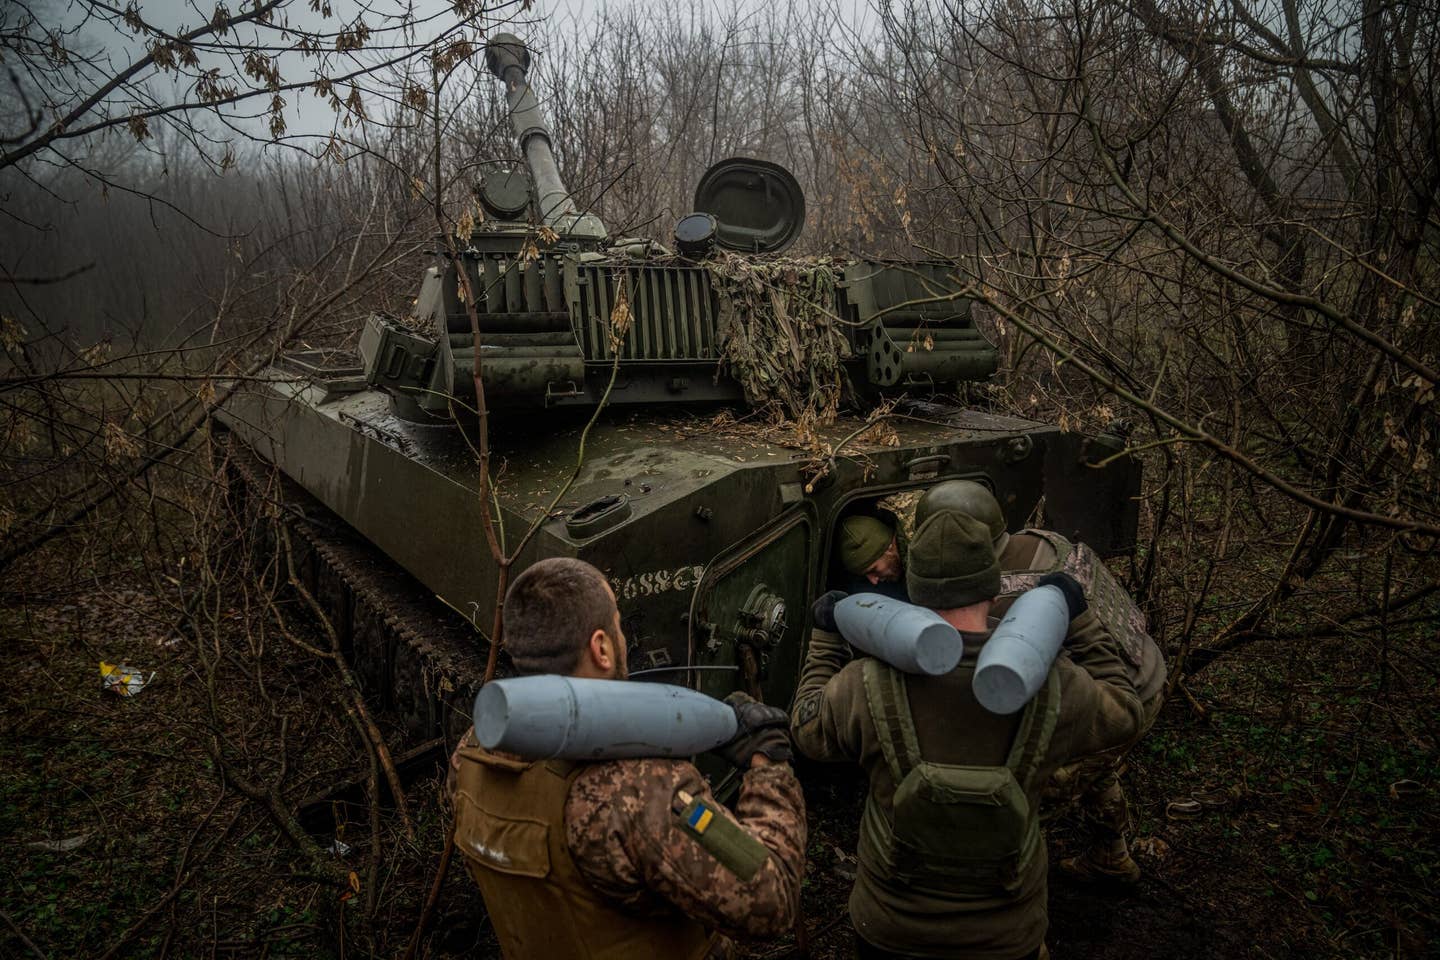 Ukrainian artillerymen from the 24th brigade load ammunition inside of a 2S1 Gvozdika self-propelled howitzer at a position along the front line in the vicinity of Bakhmut, Donetsk region. (Photo by Ihor Tkachov / AFP) (Photo by IHOR TKACHOV/AFP via Getty Images)